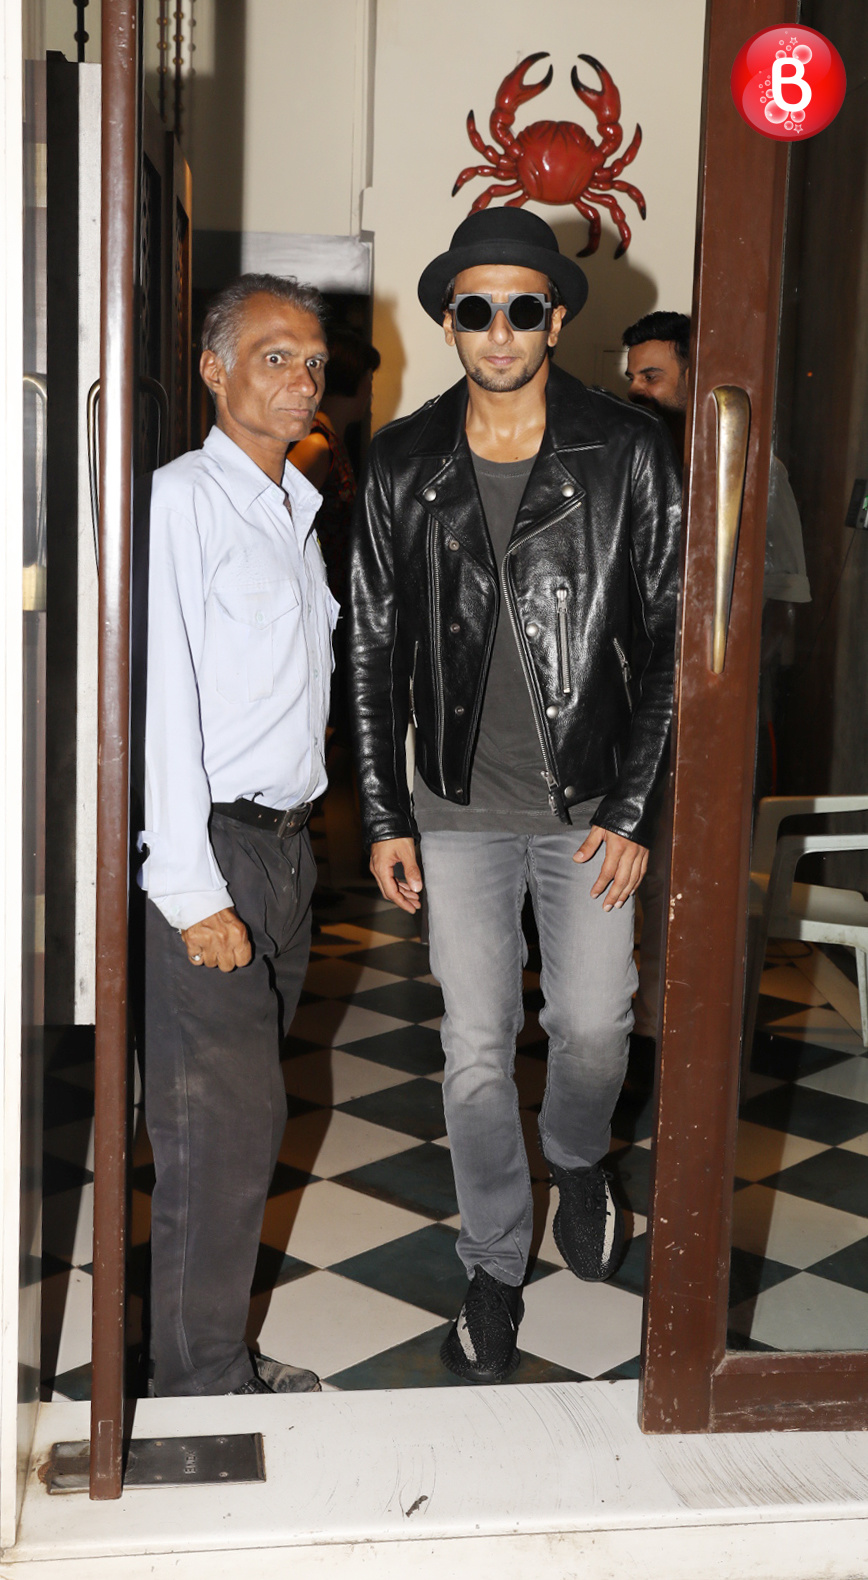 In the scorching heat of summers, Ranveer goes for the leather